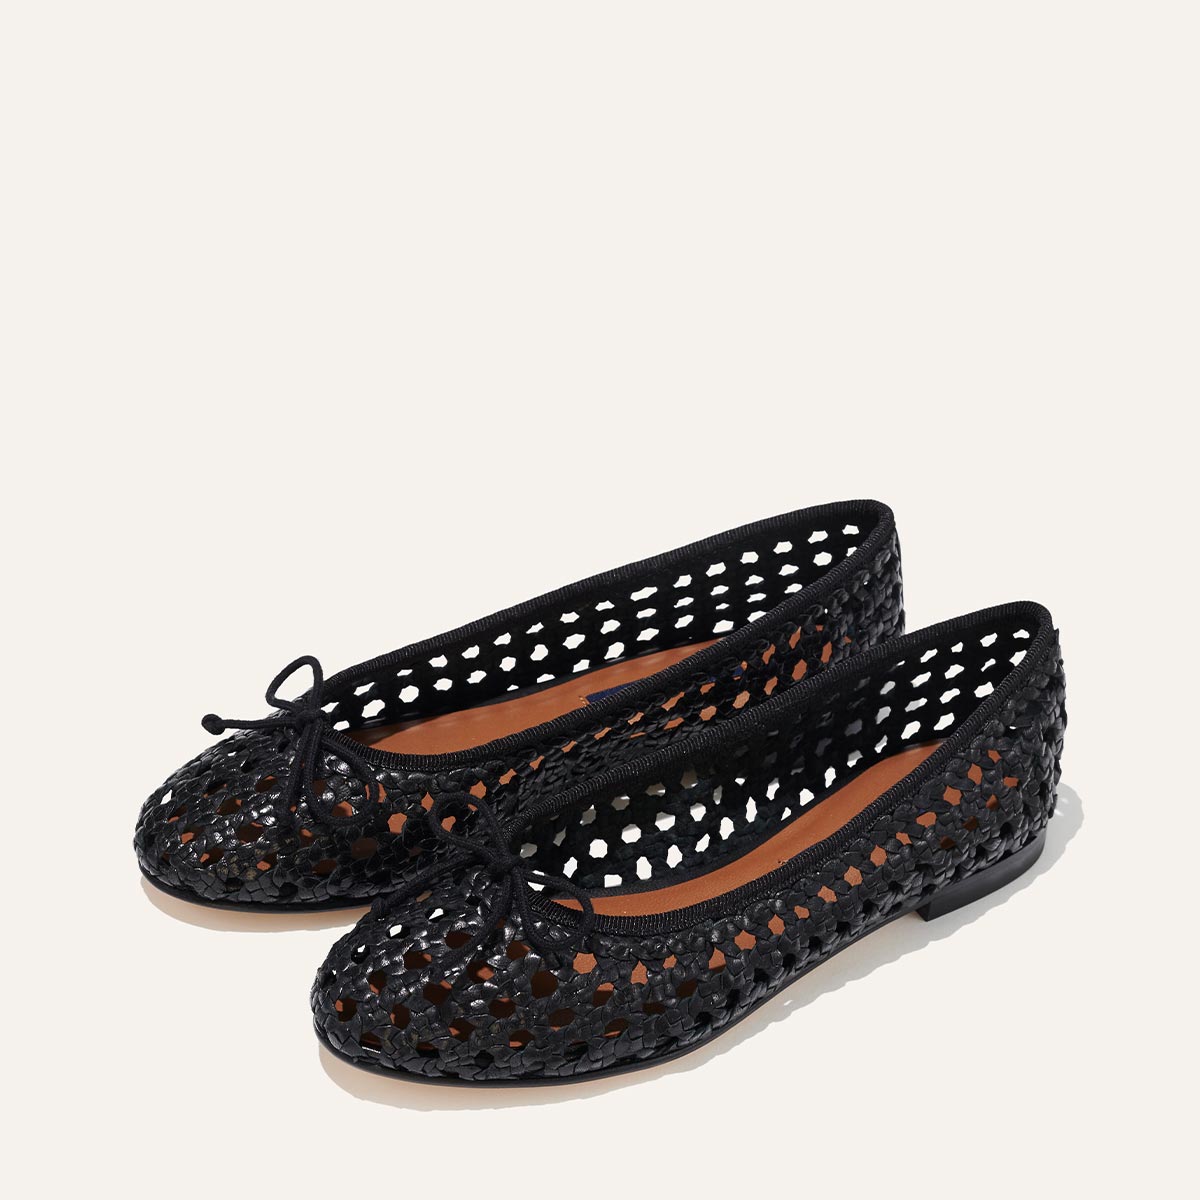 Margaux's classic and comfortable Demi ballet flat, handwoven in India from soft black leather and finished in Spain